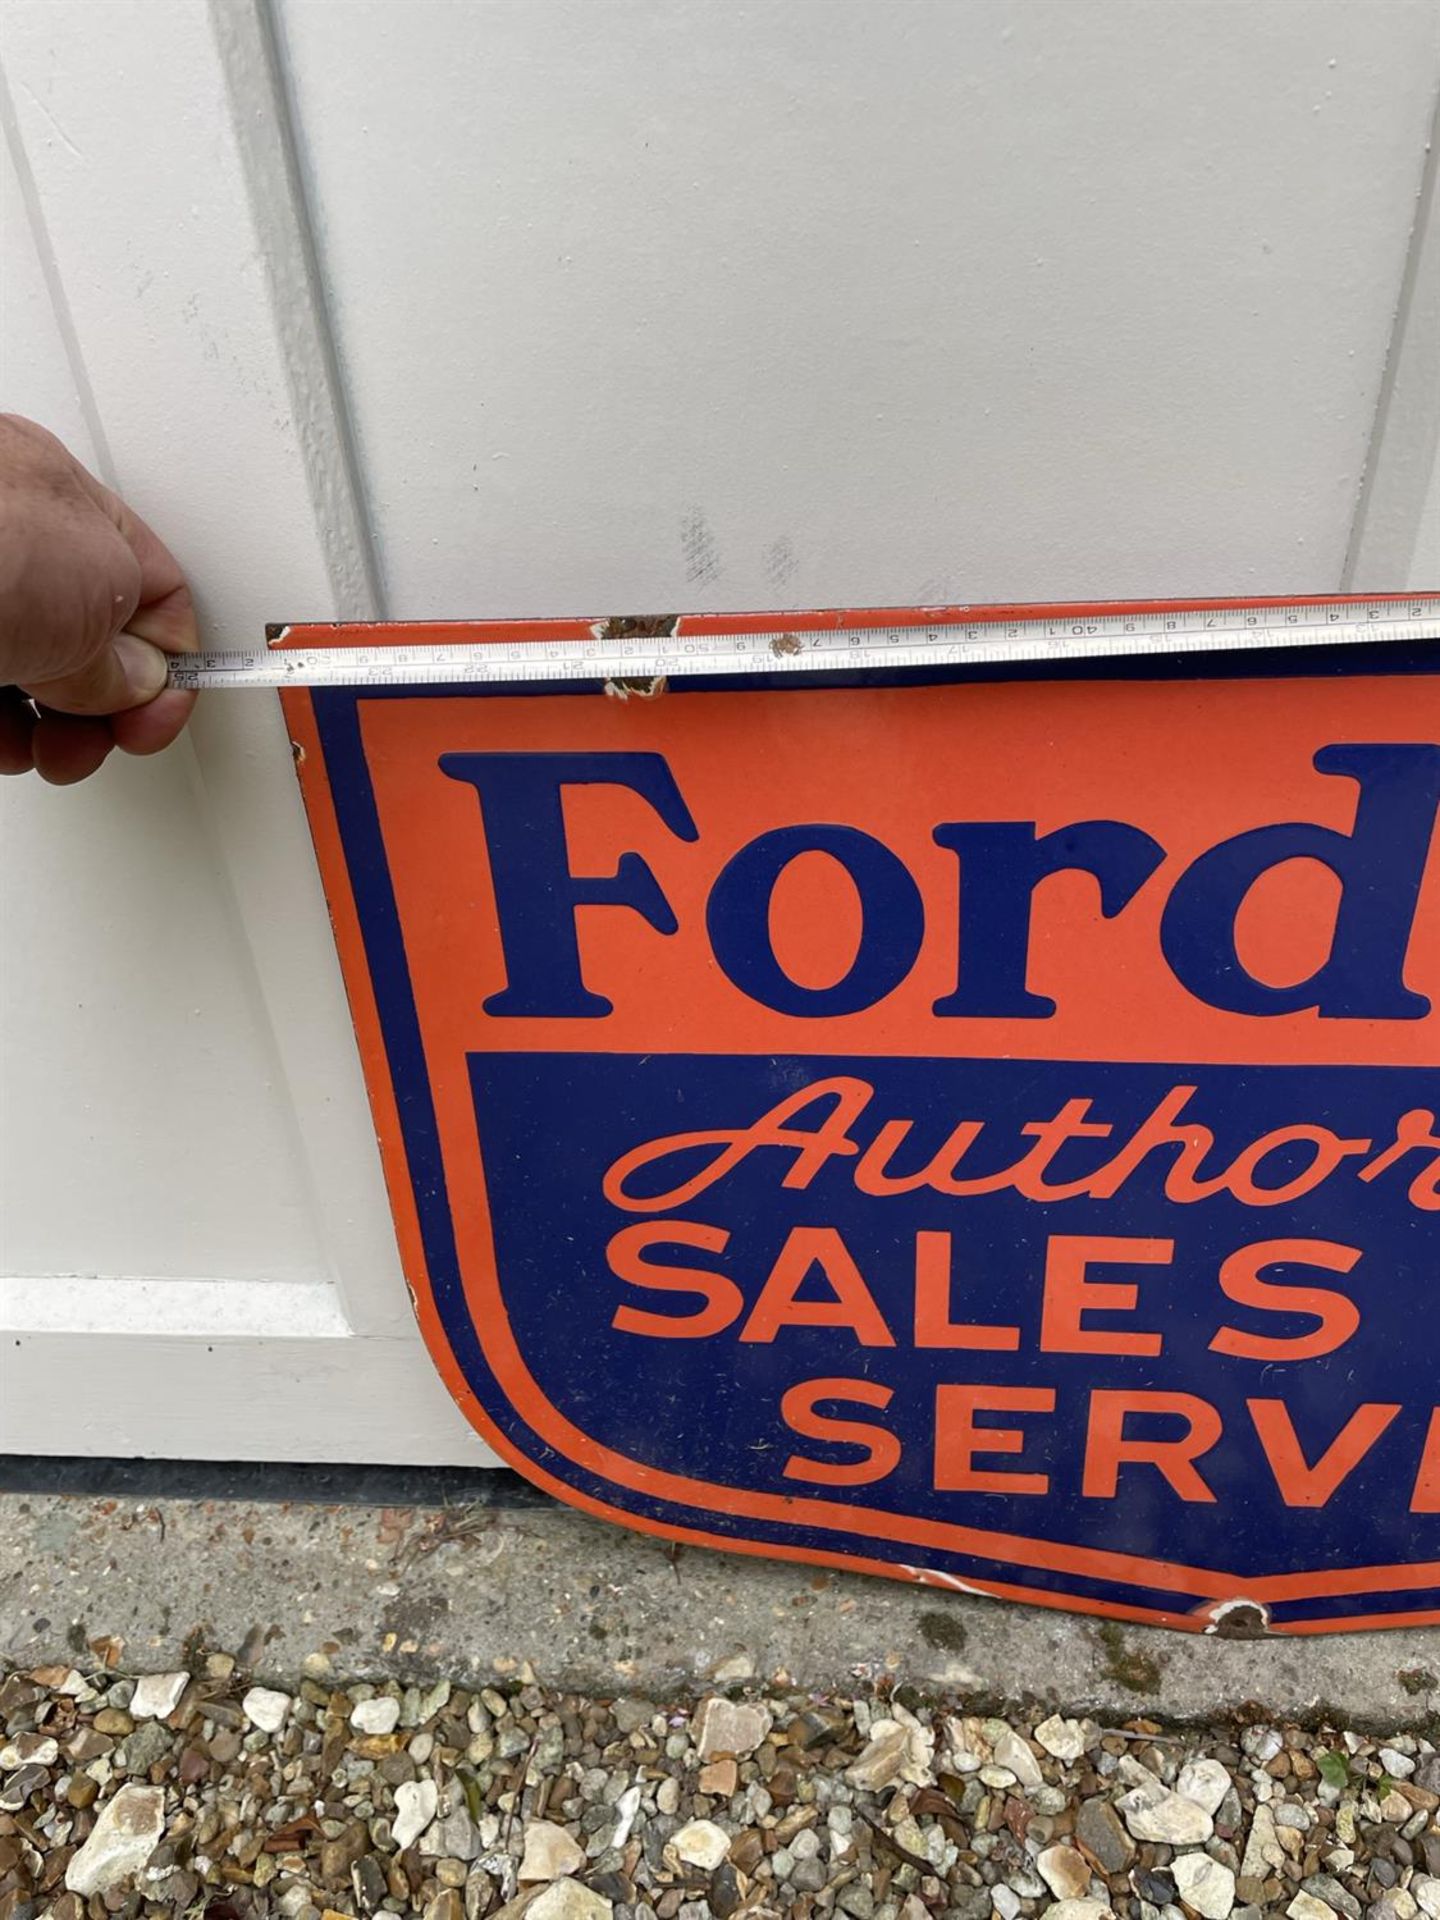 Fordson Sales and Service Contemporary Enamel Sign - Image 2 of 5